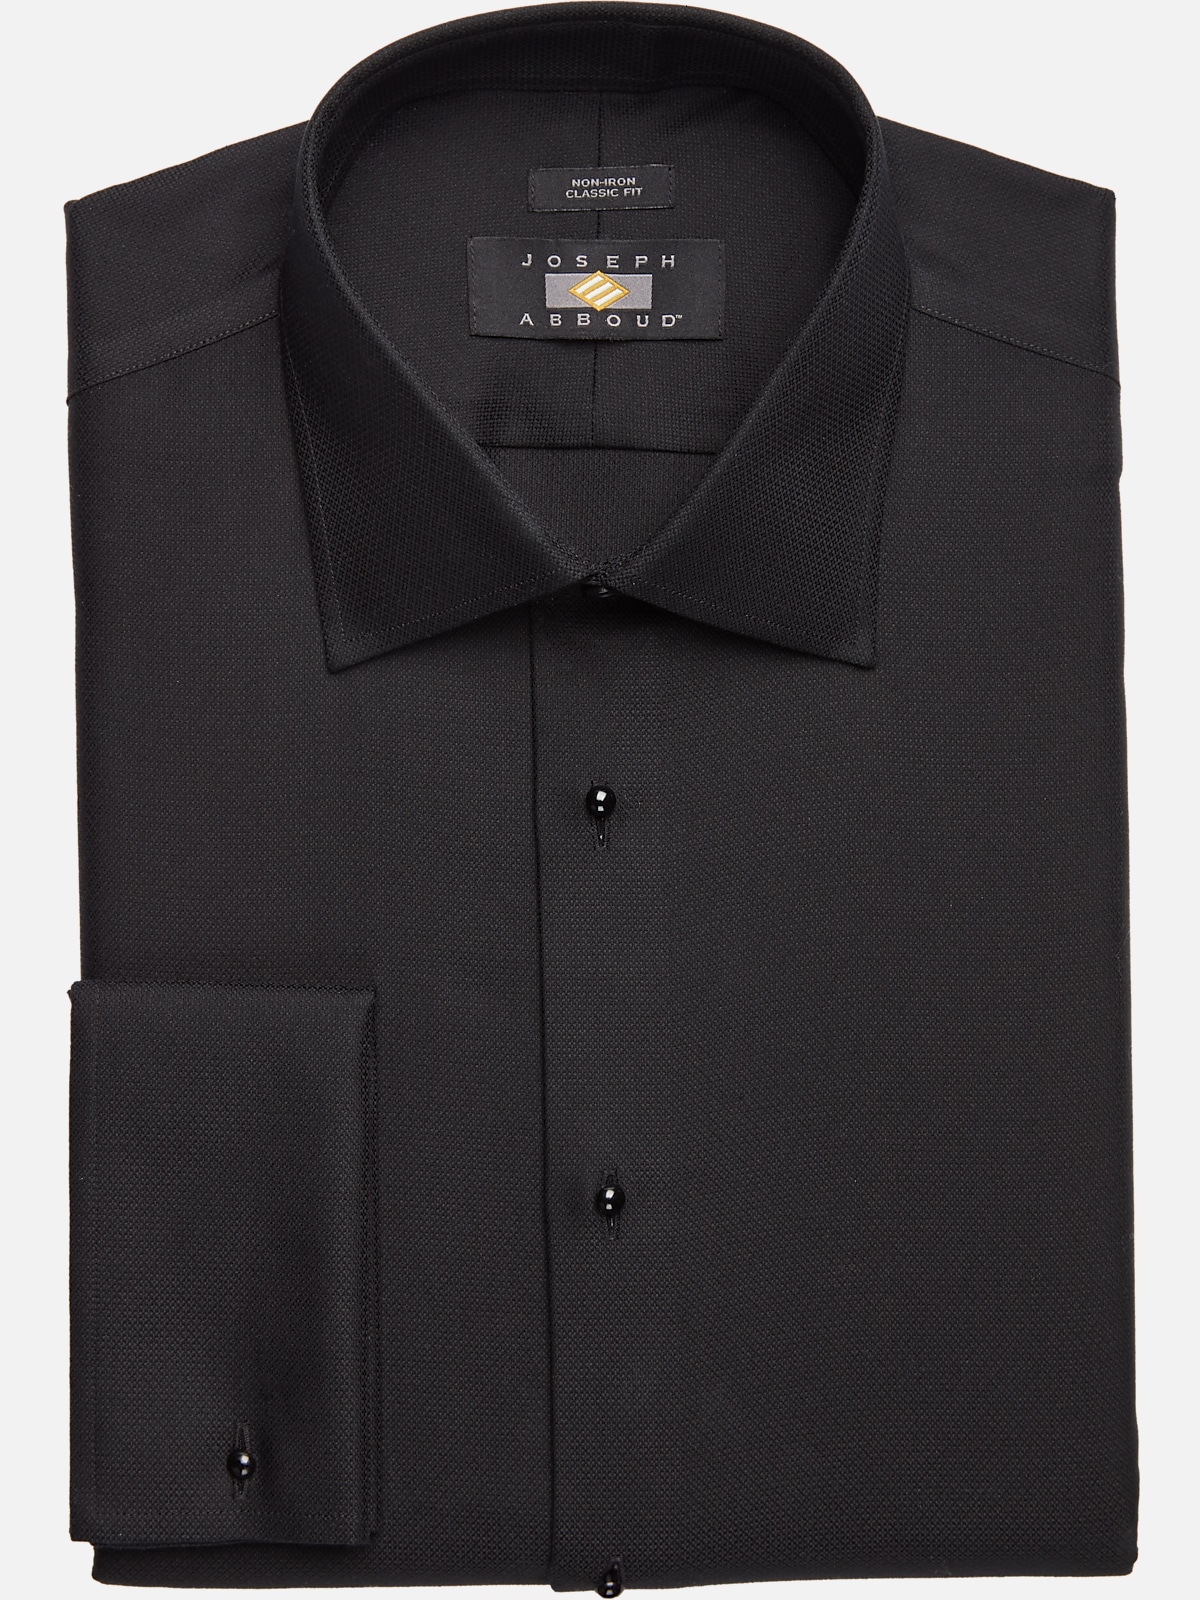 Joseph Abboud Classic Fit French Cuff Tuxedo Formal Shirt | Clearance ...